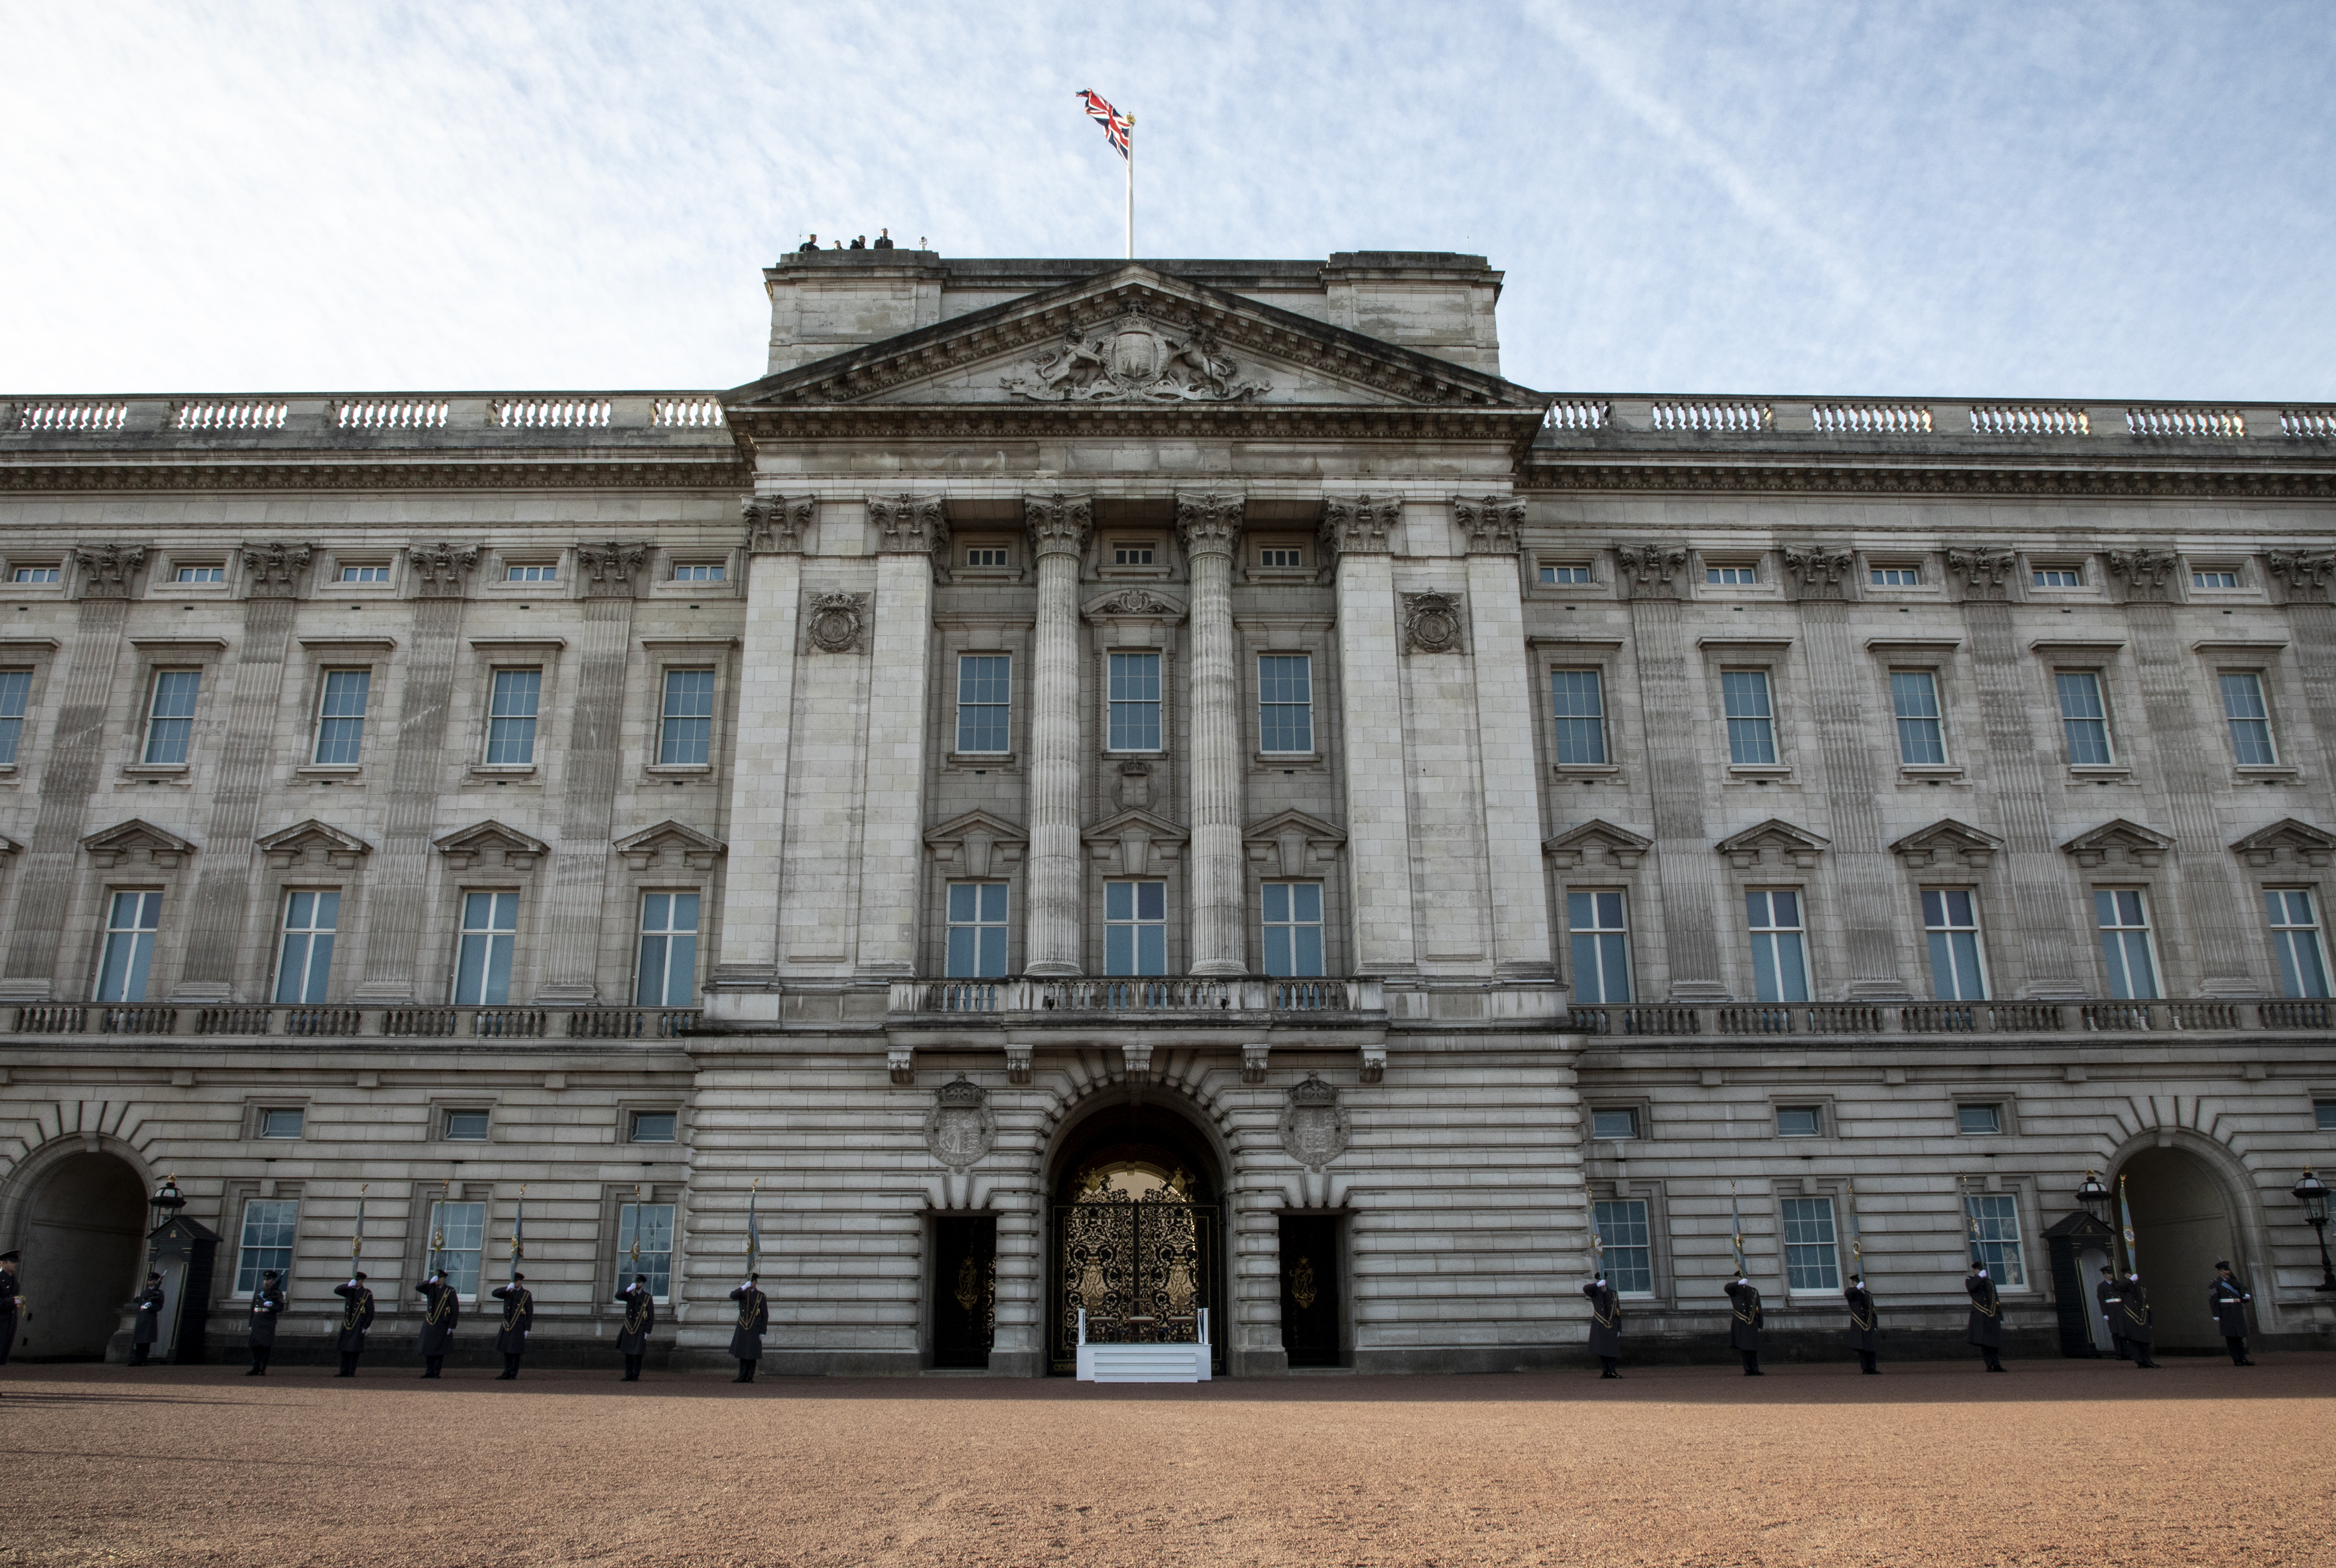 Front view of Buckingham Palace.